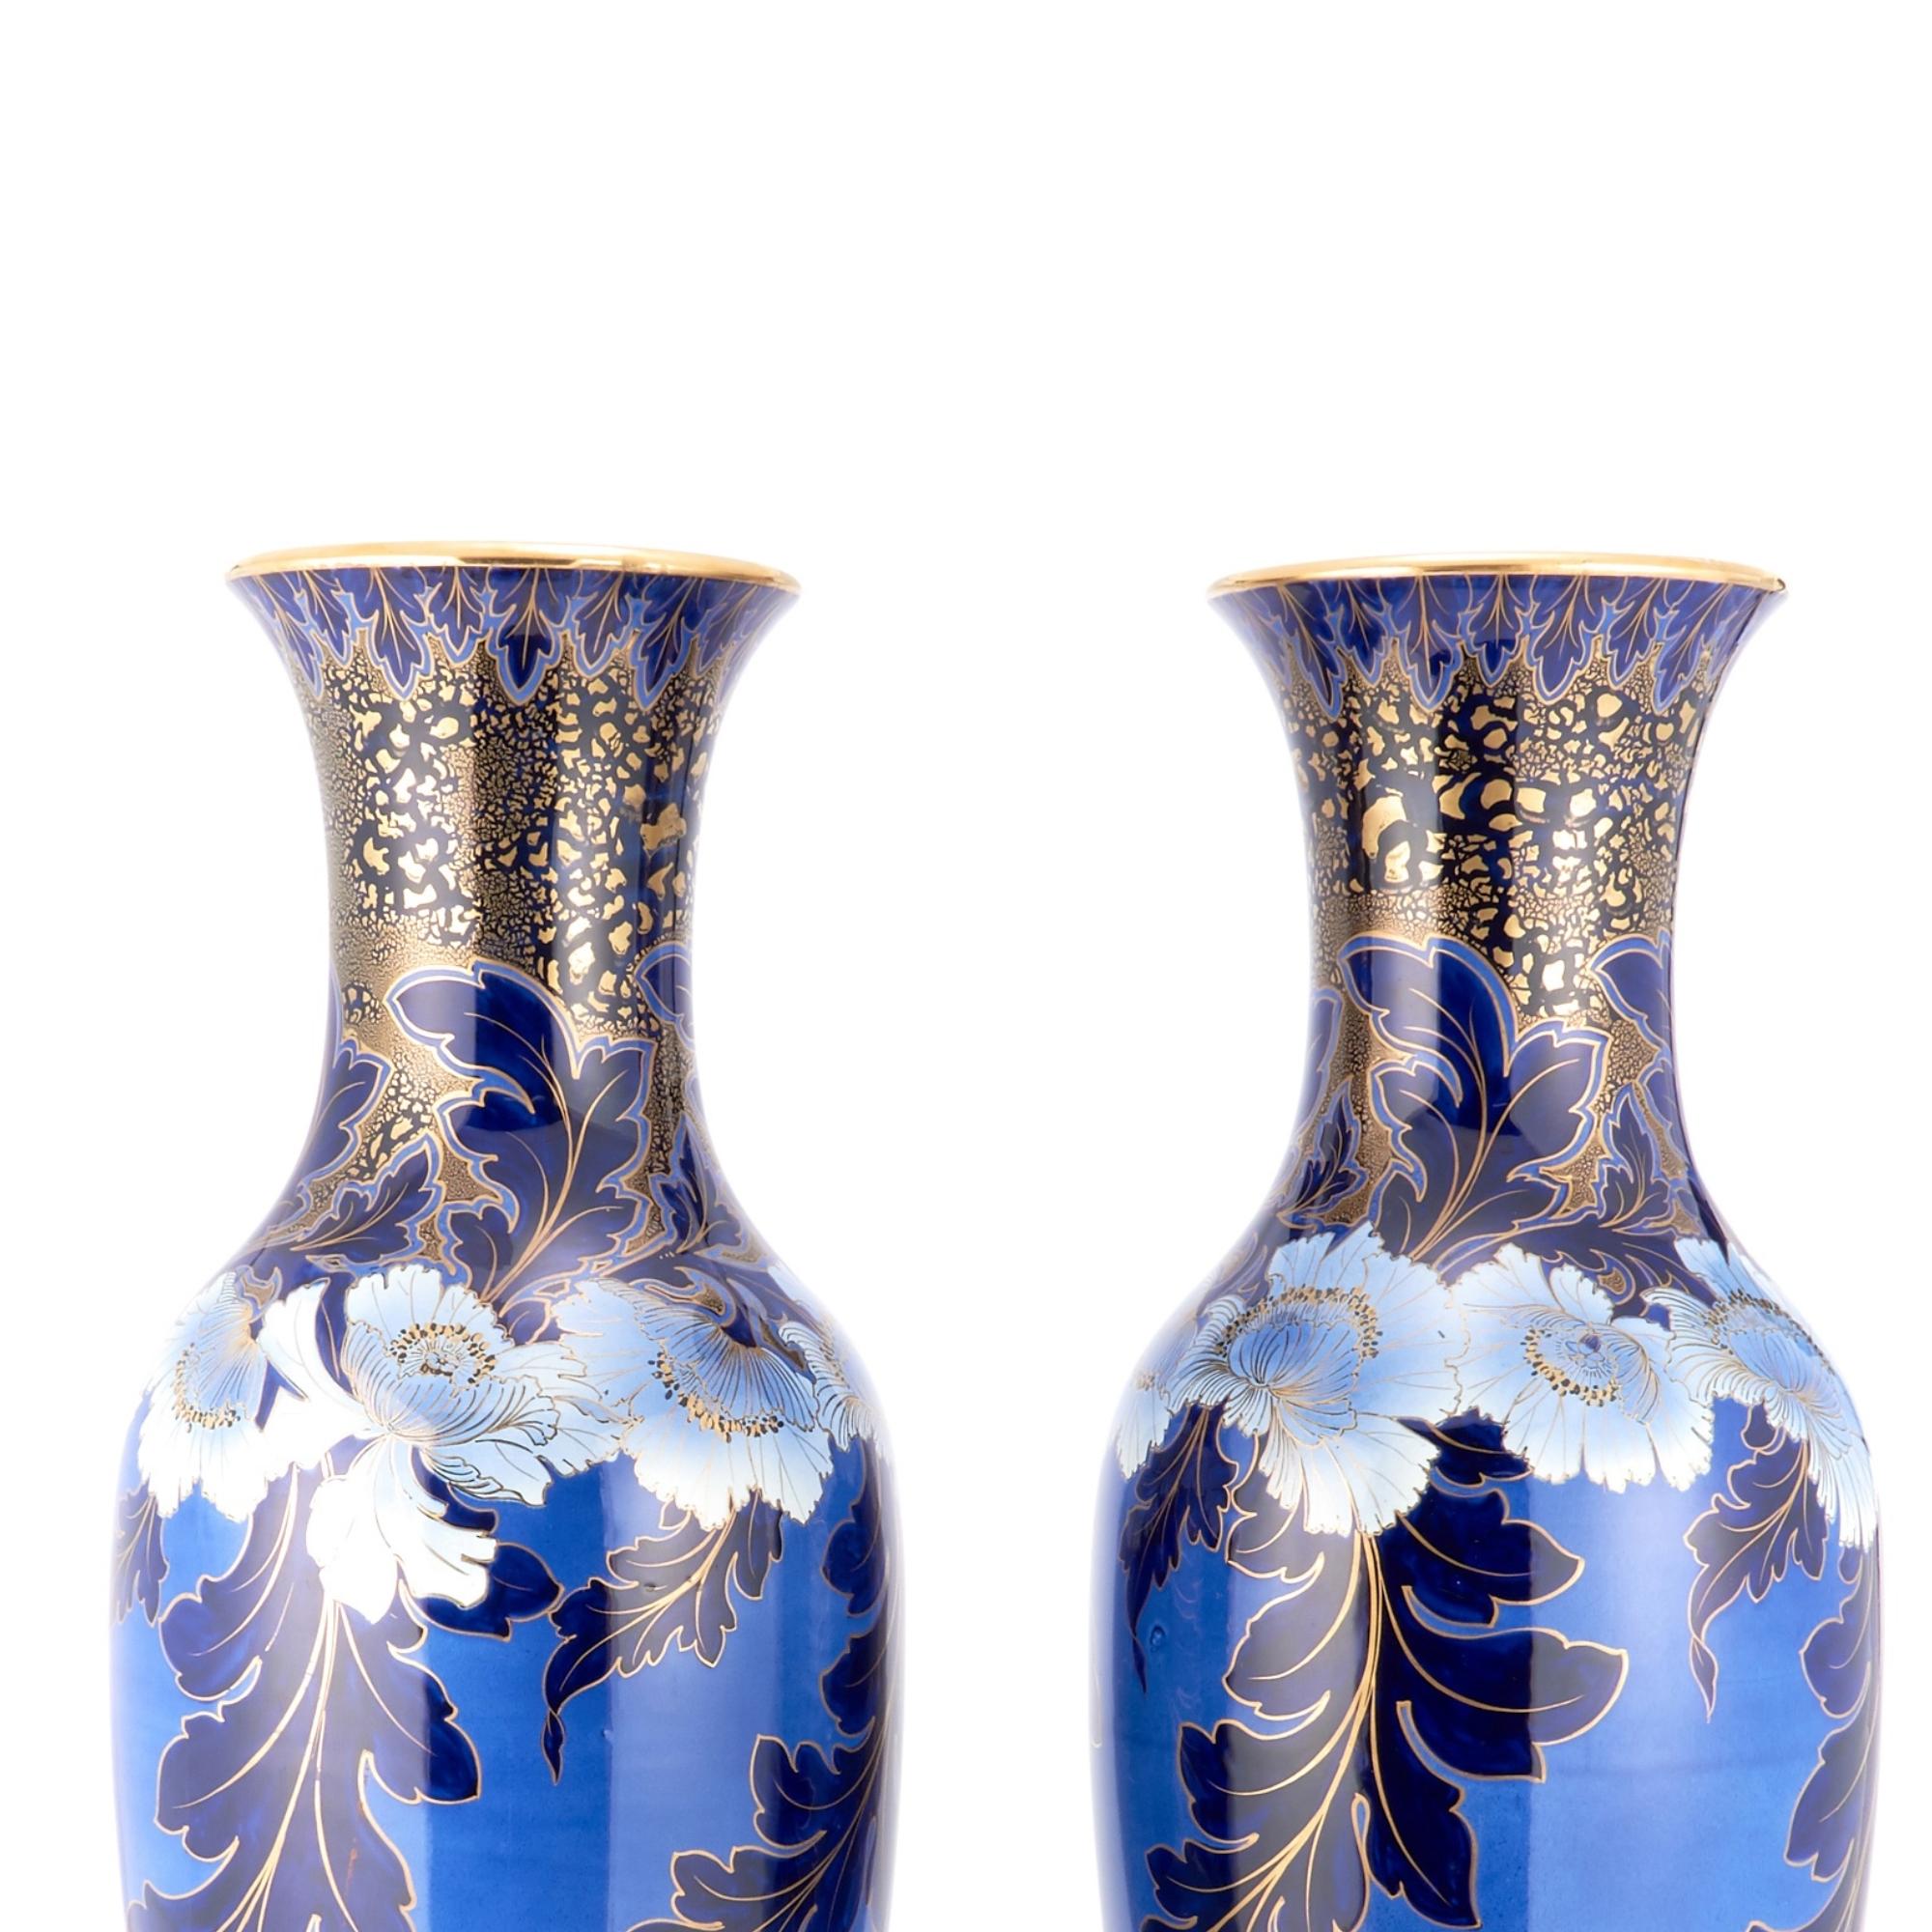 Gold 19th Century Large Art Nouveau Style Hand-Painted & Gilt Decorated Vases / Urns For Sale